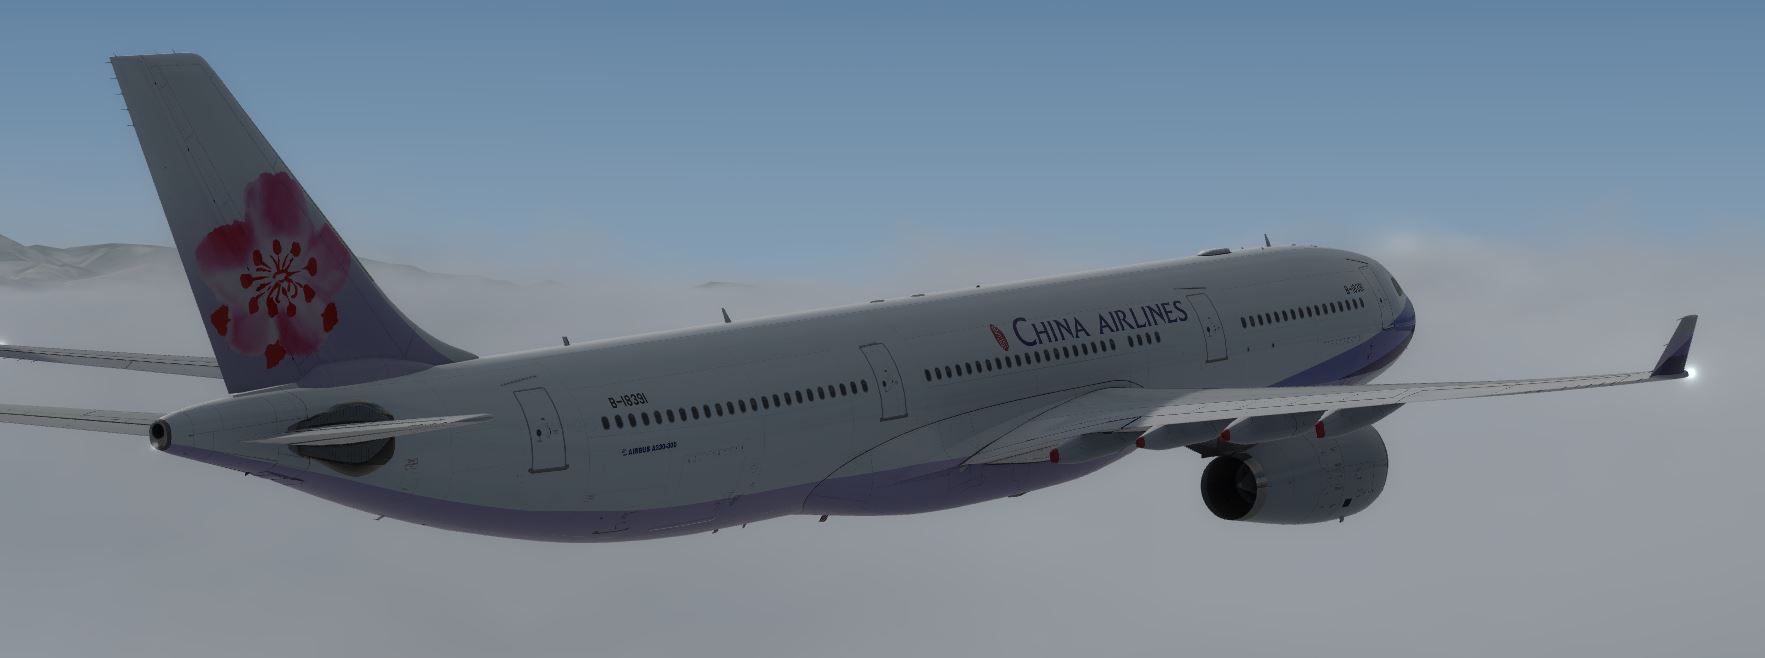 AS A330 ChinaAirline-7937 